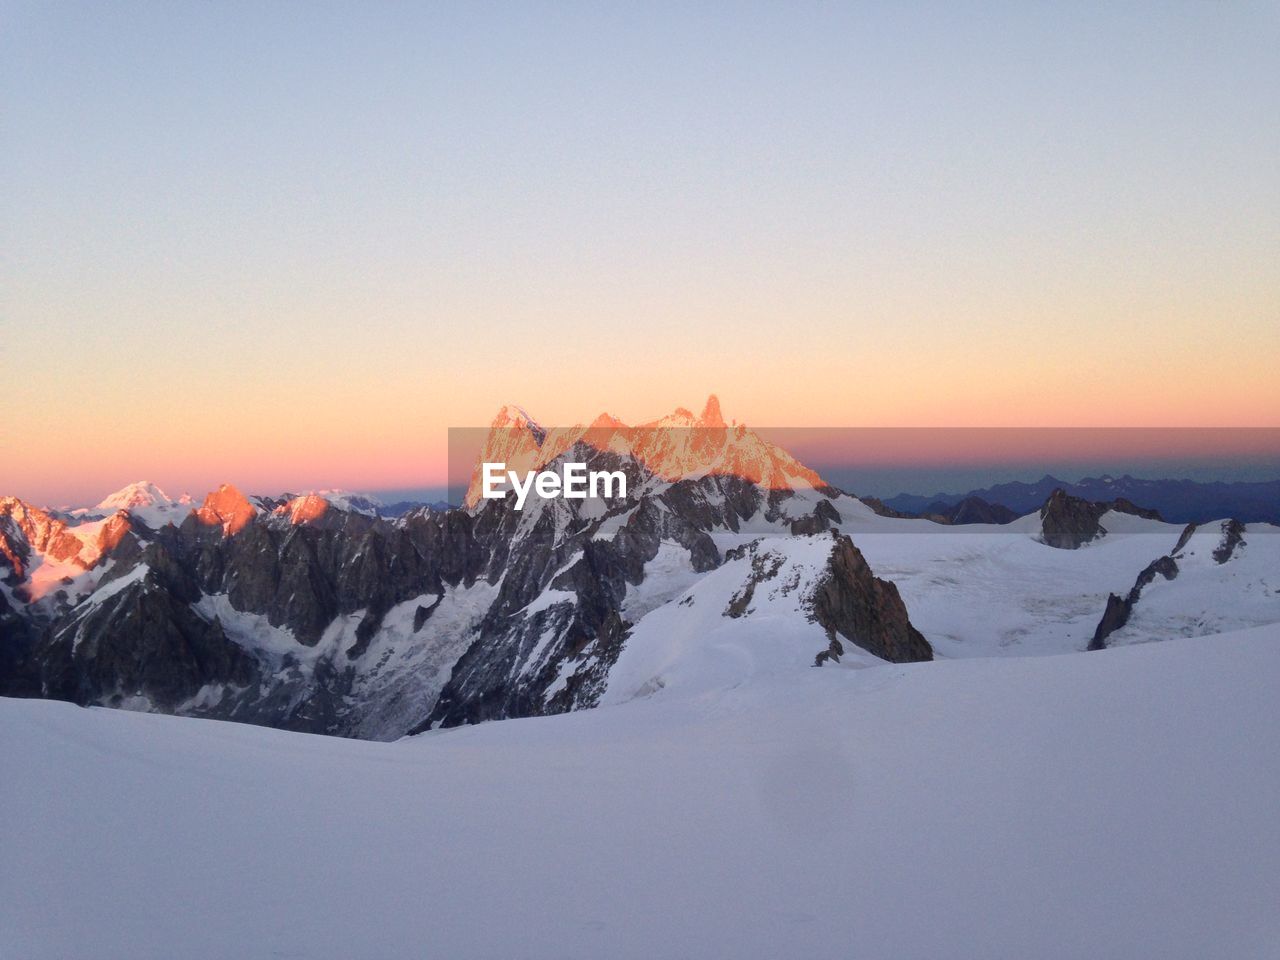 scenic view of snowcapped mountain against clear sky during sunset